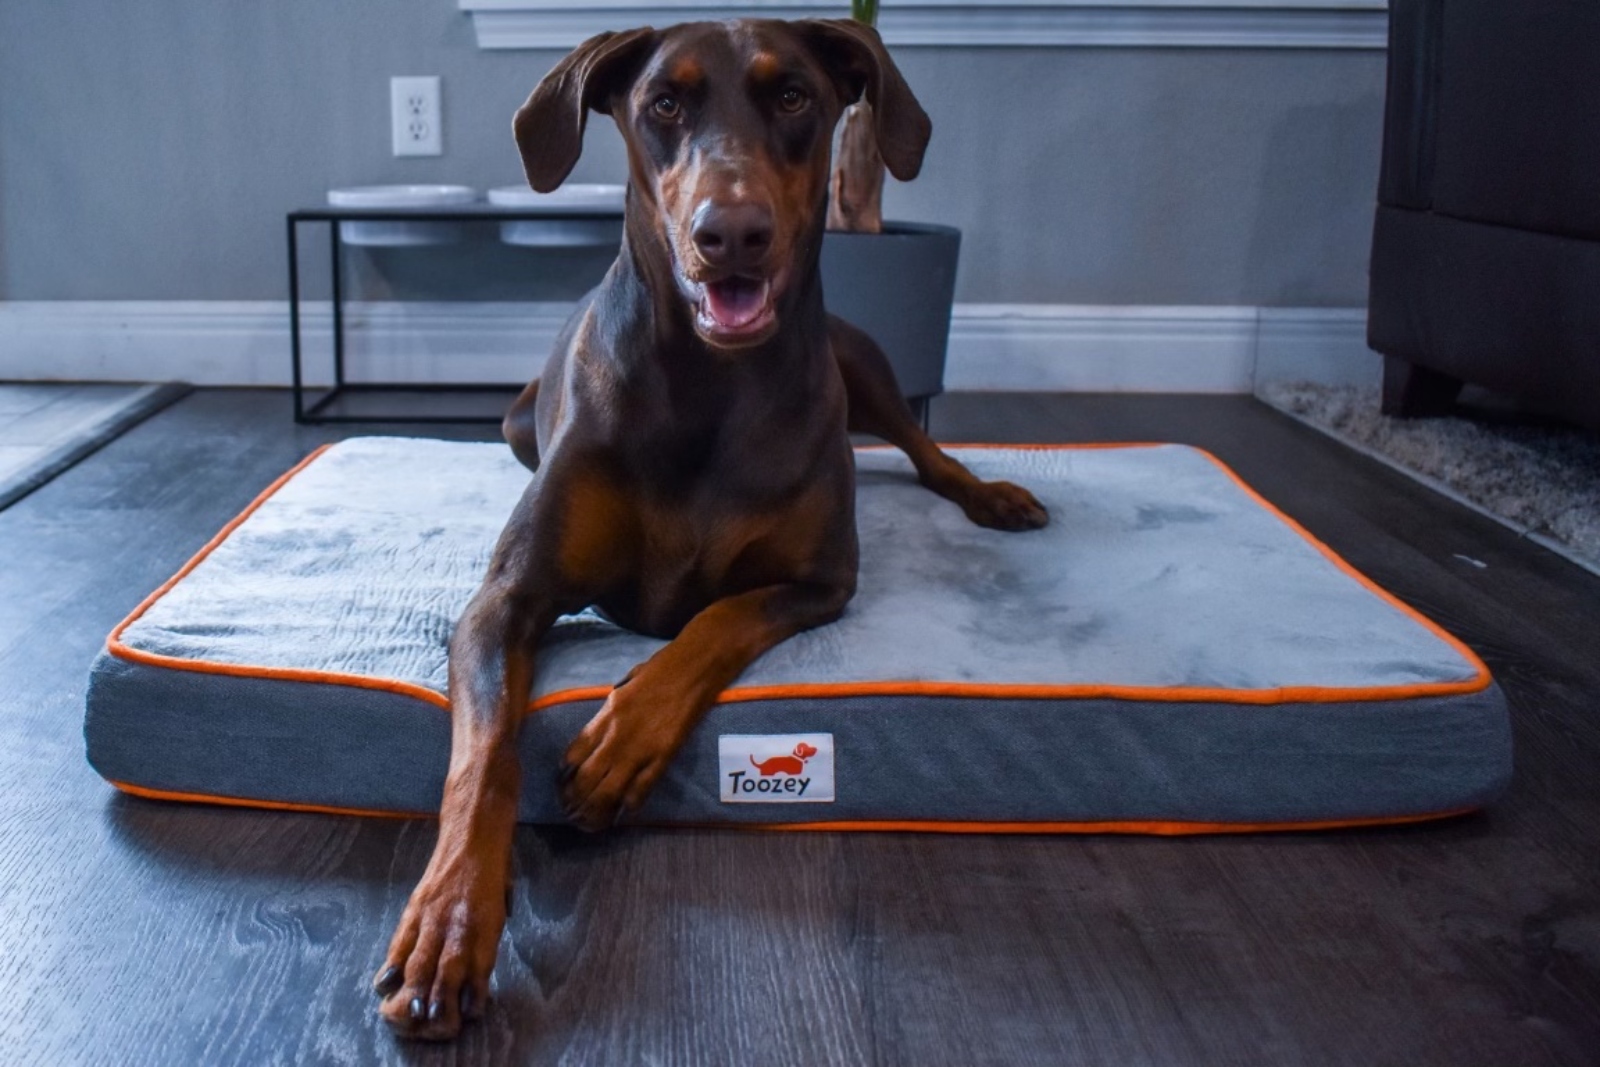 Zia the Doberman pinscher rests on a gray doggy bed